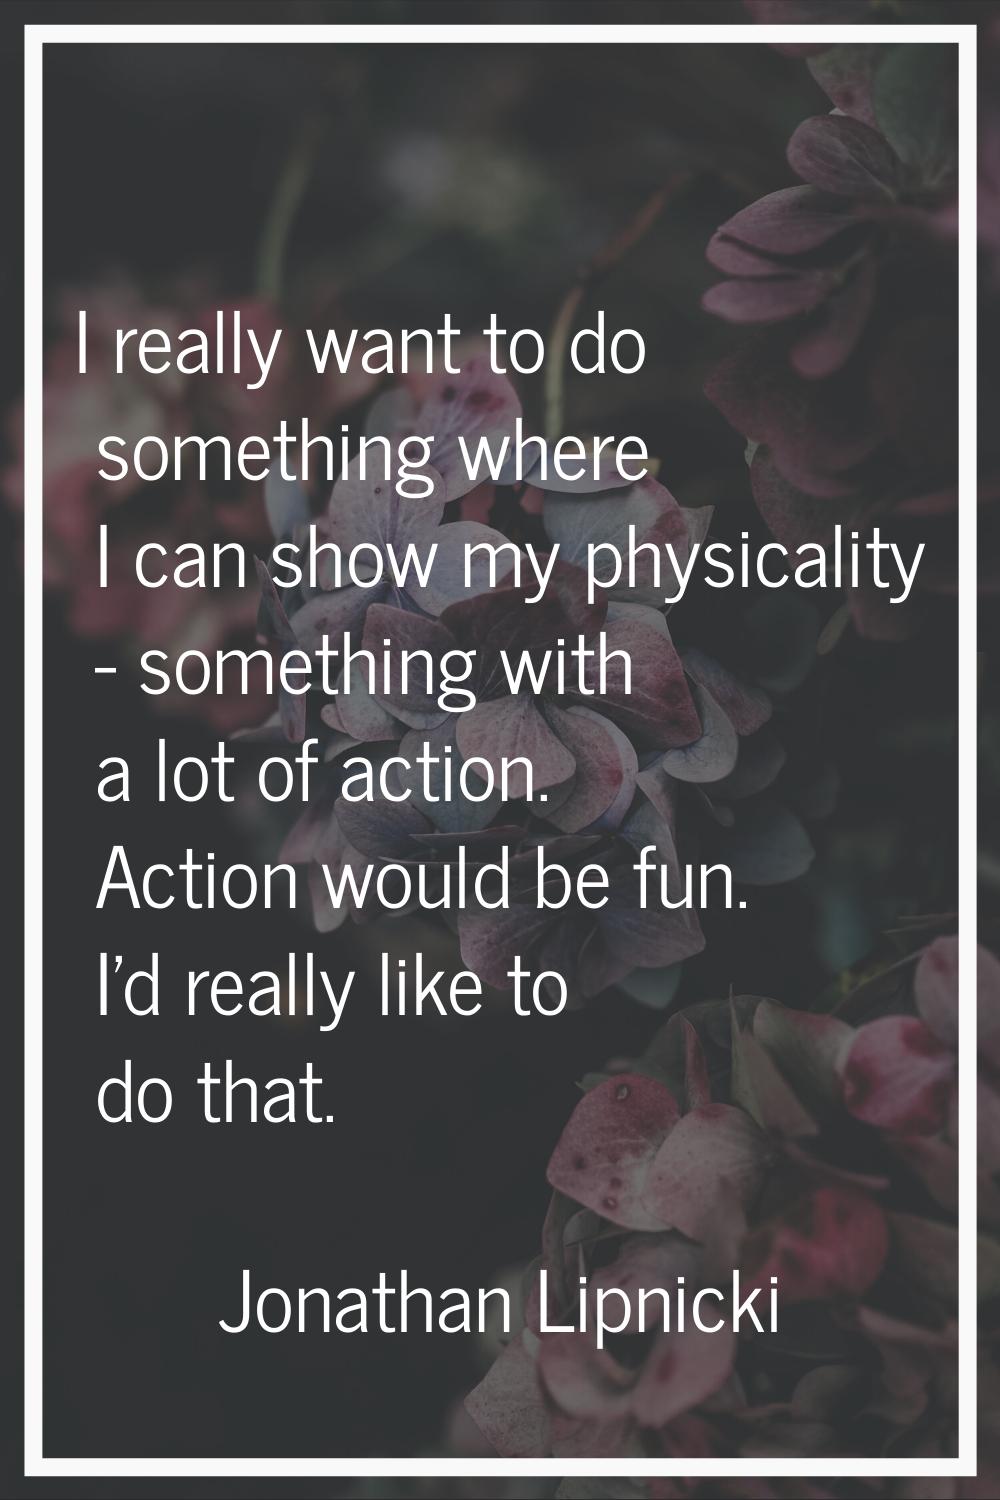 I really want to do something where I can show my physicality - something with a lot of action. Act